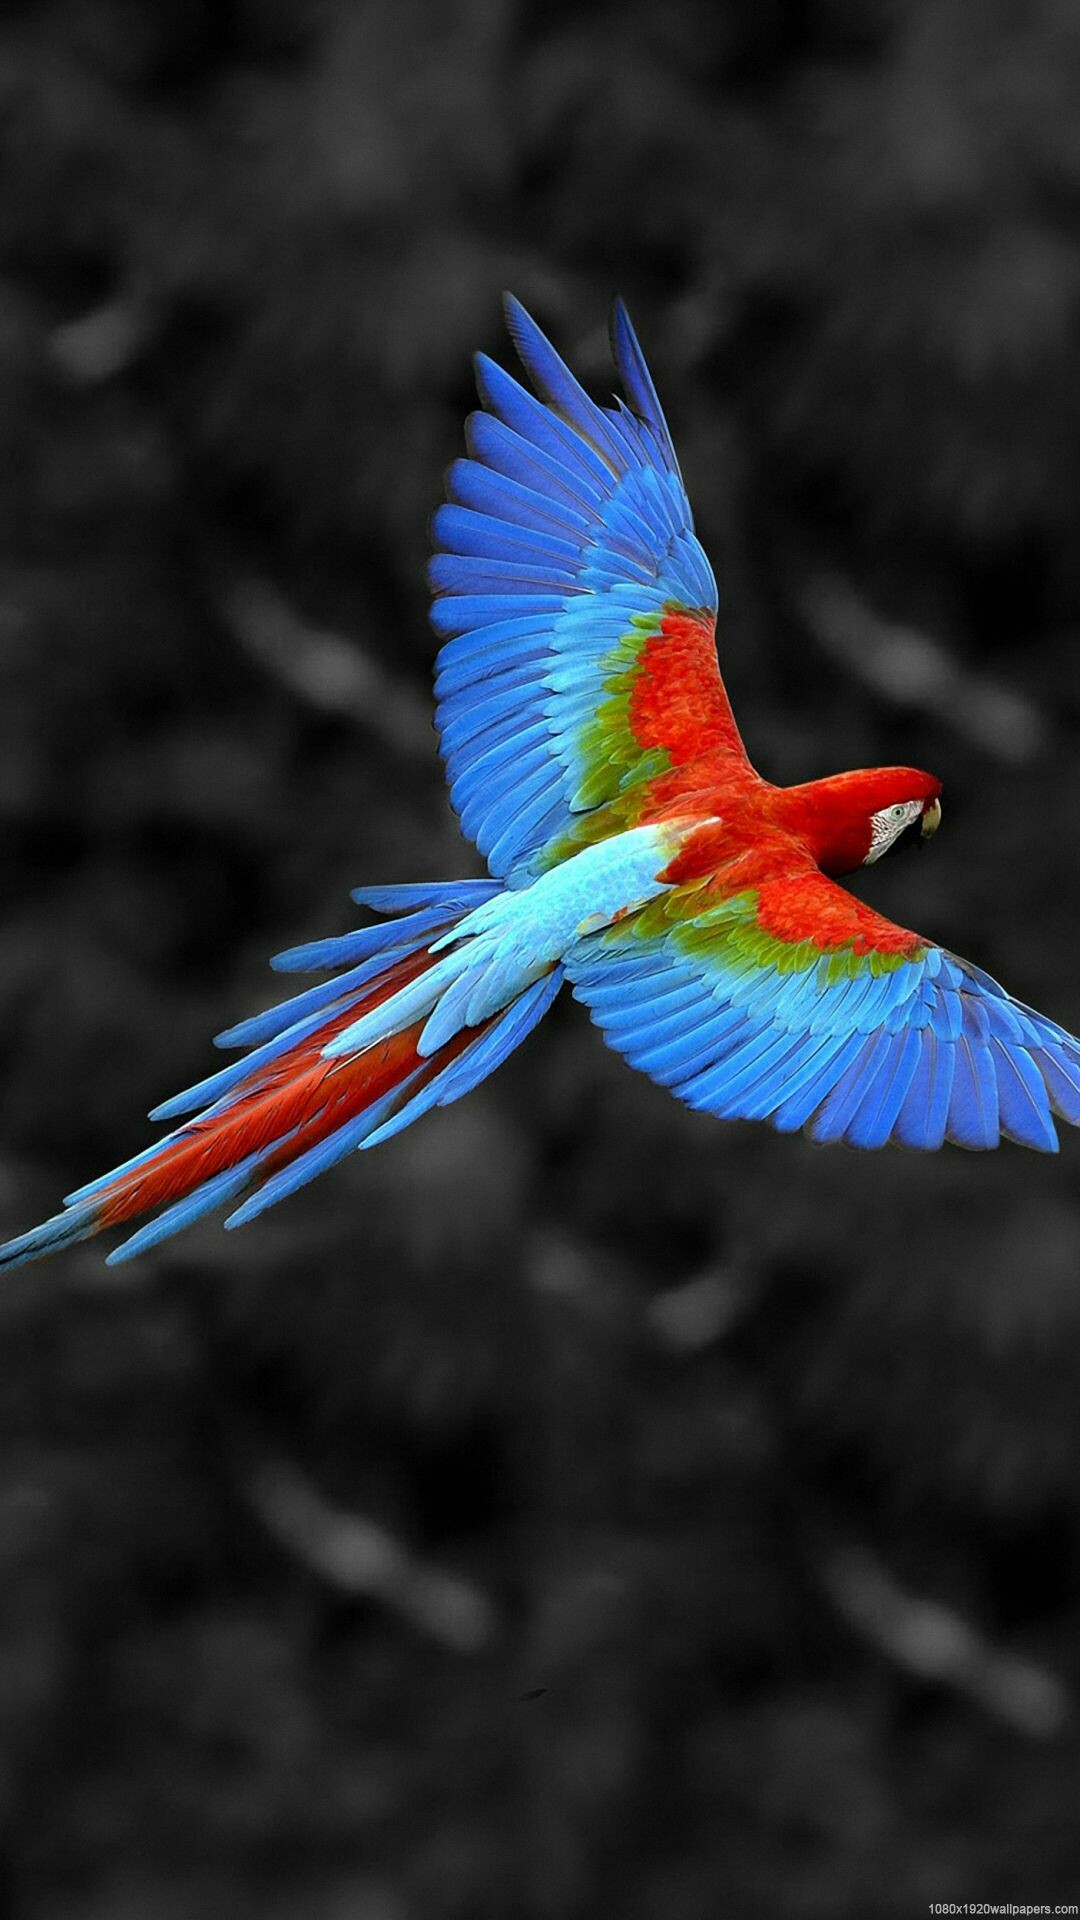 Bird: Parrot, Red-and-green macawm, A vertebrate animal. 1080x1920 Full HD Wallpaper.